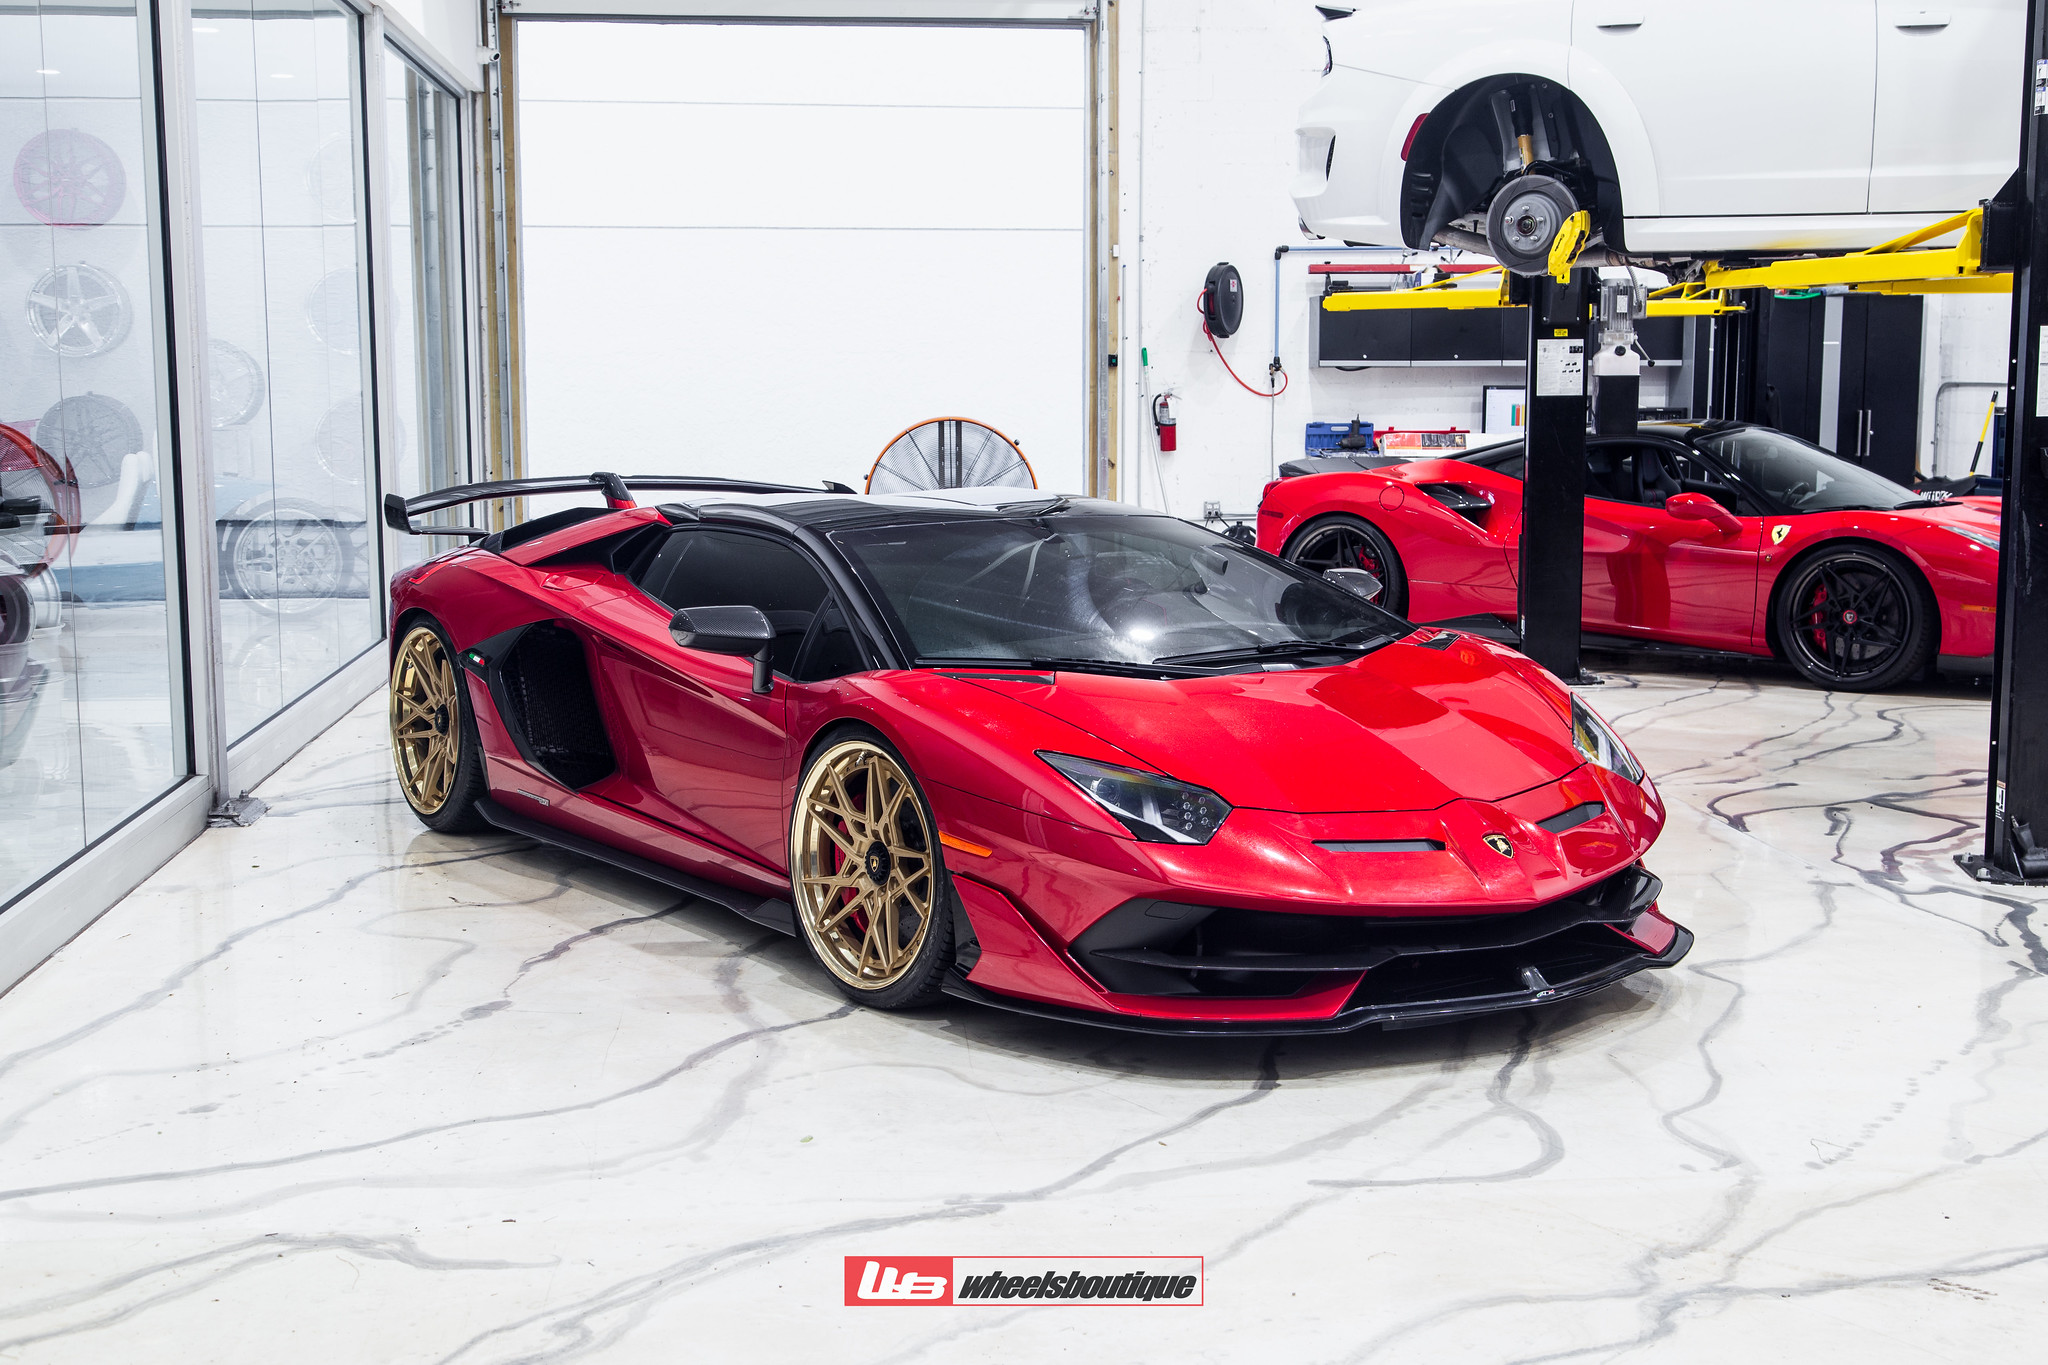 Lamborghini Aventador Svj Roadster Red With Gold Anrky S3 X2 Wheel Front